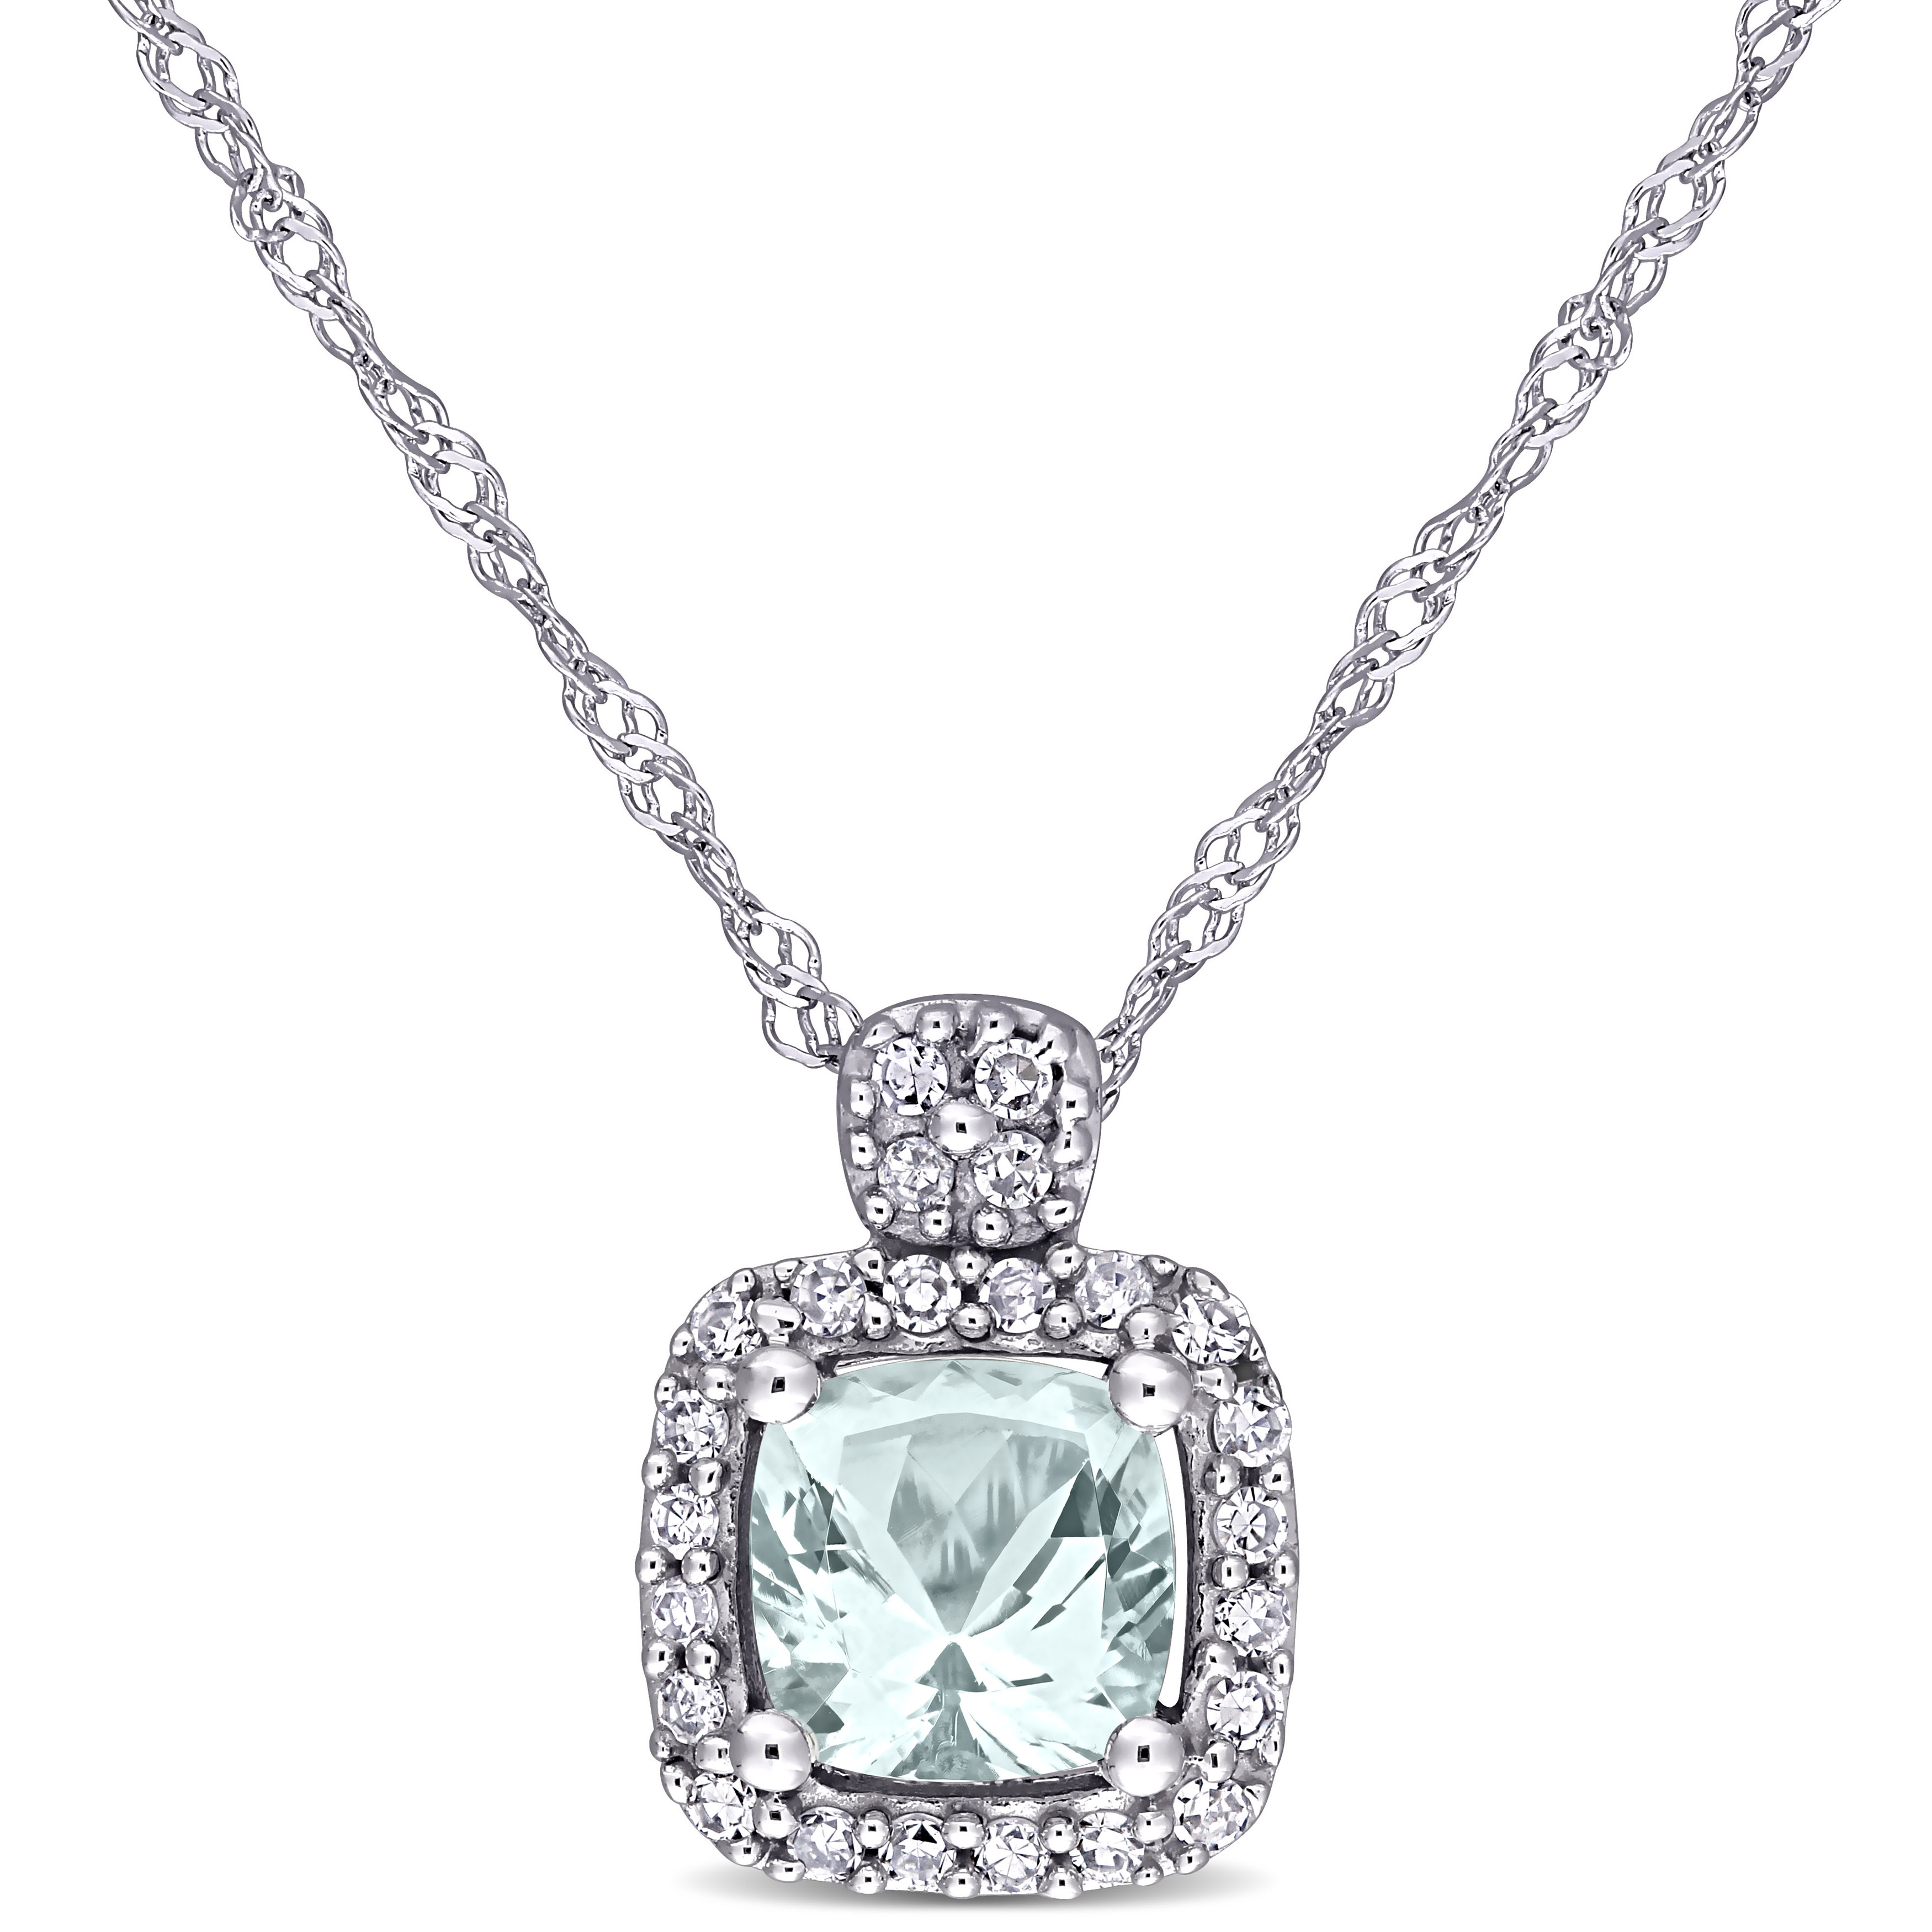 Cushion Cut Aquamarine and 1/10 CT TW Diamond Pendant with Chain in 10k White Gold - 17 in.